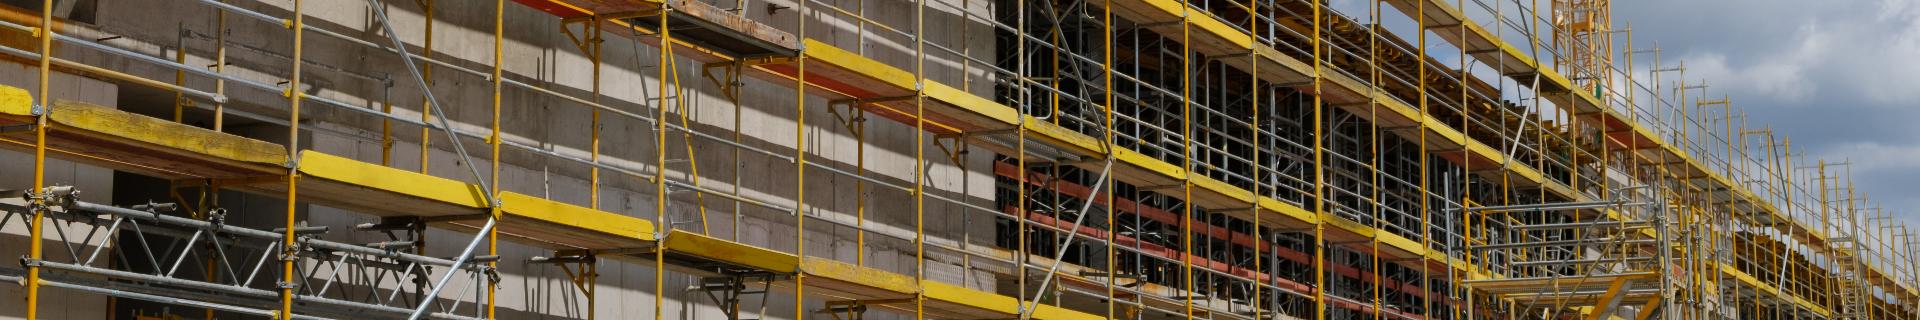 Suspended Scaffolding Safety in Construction Environments